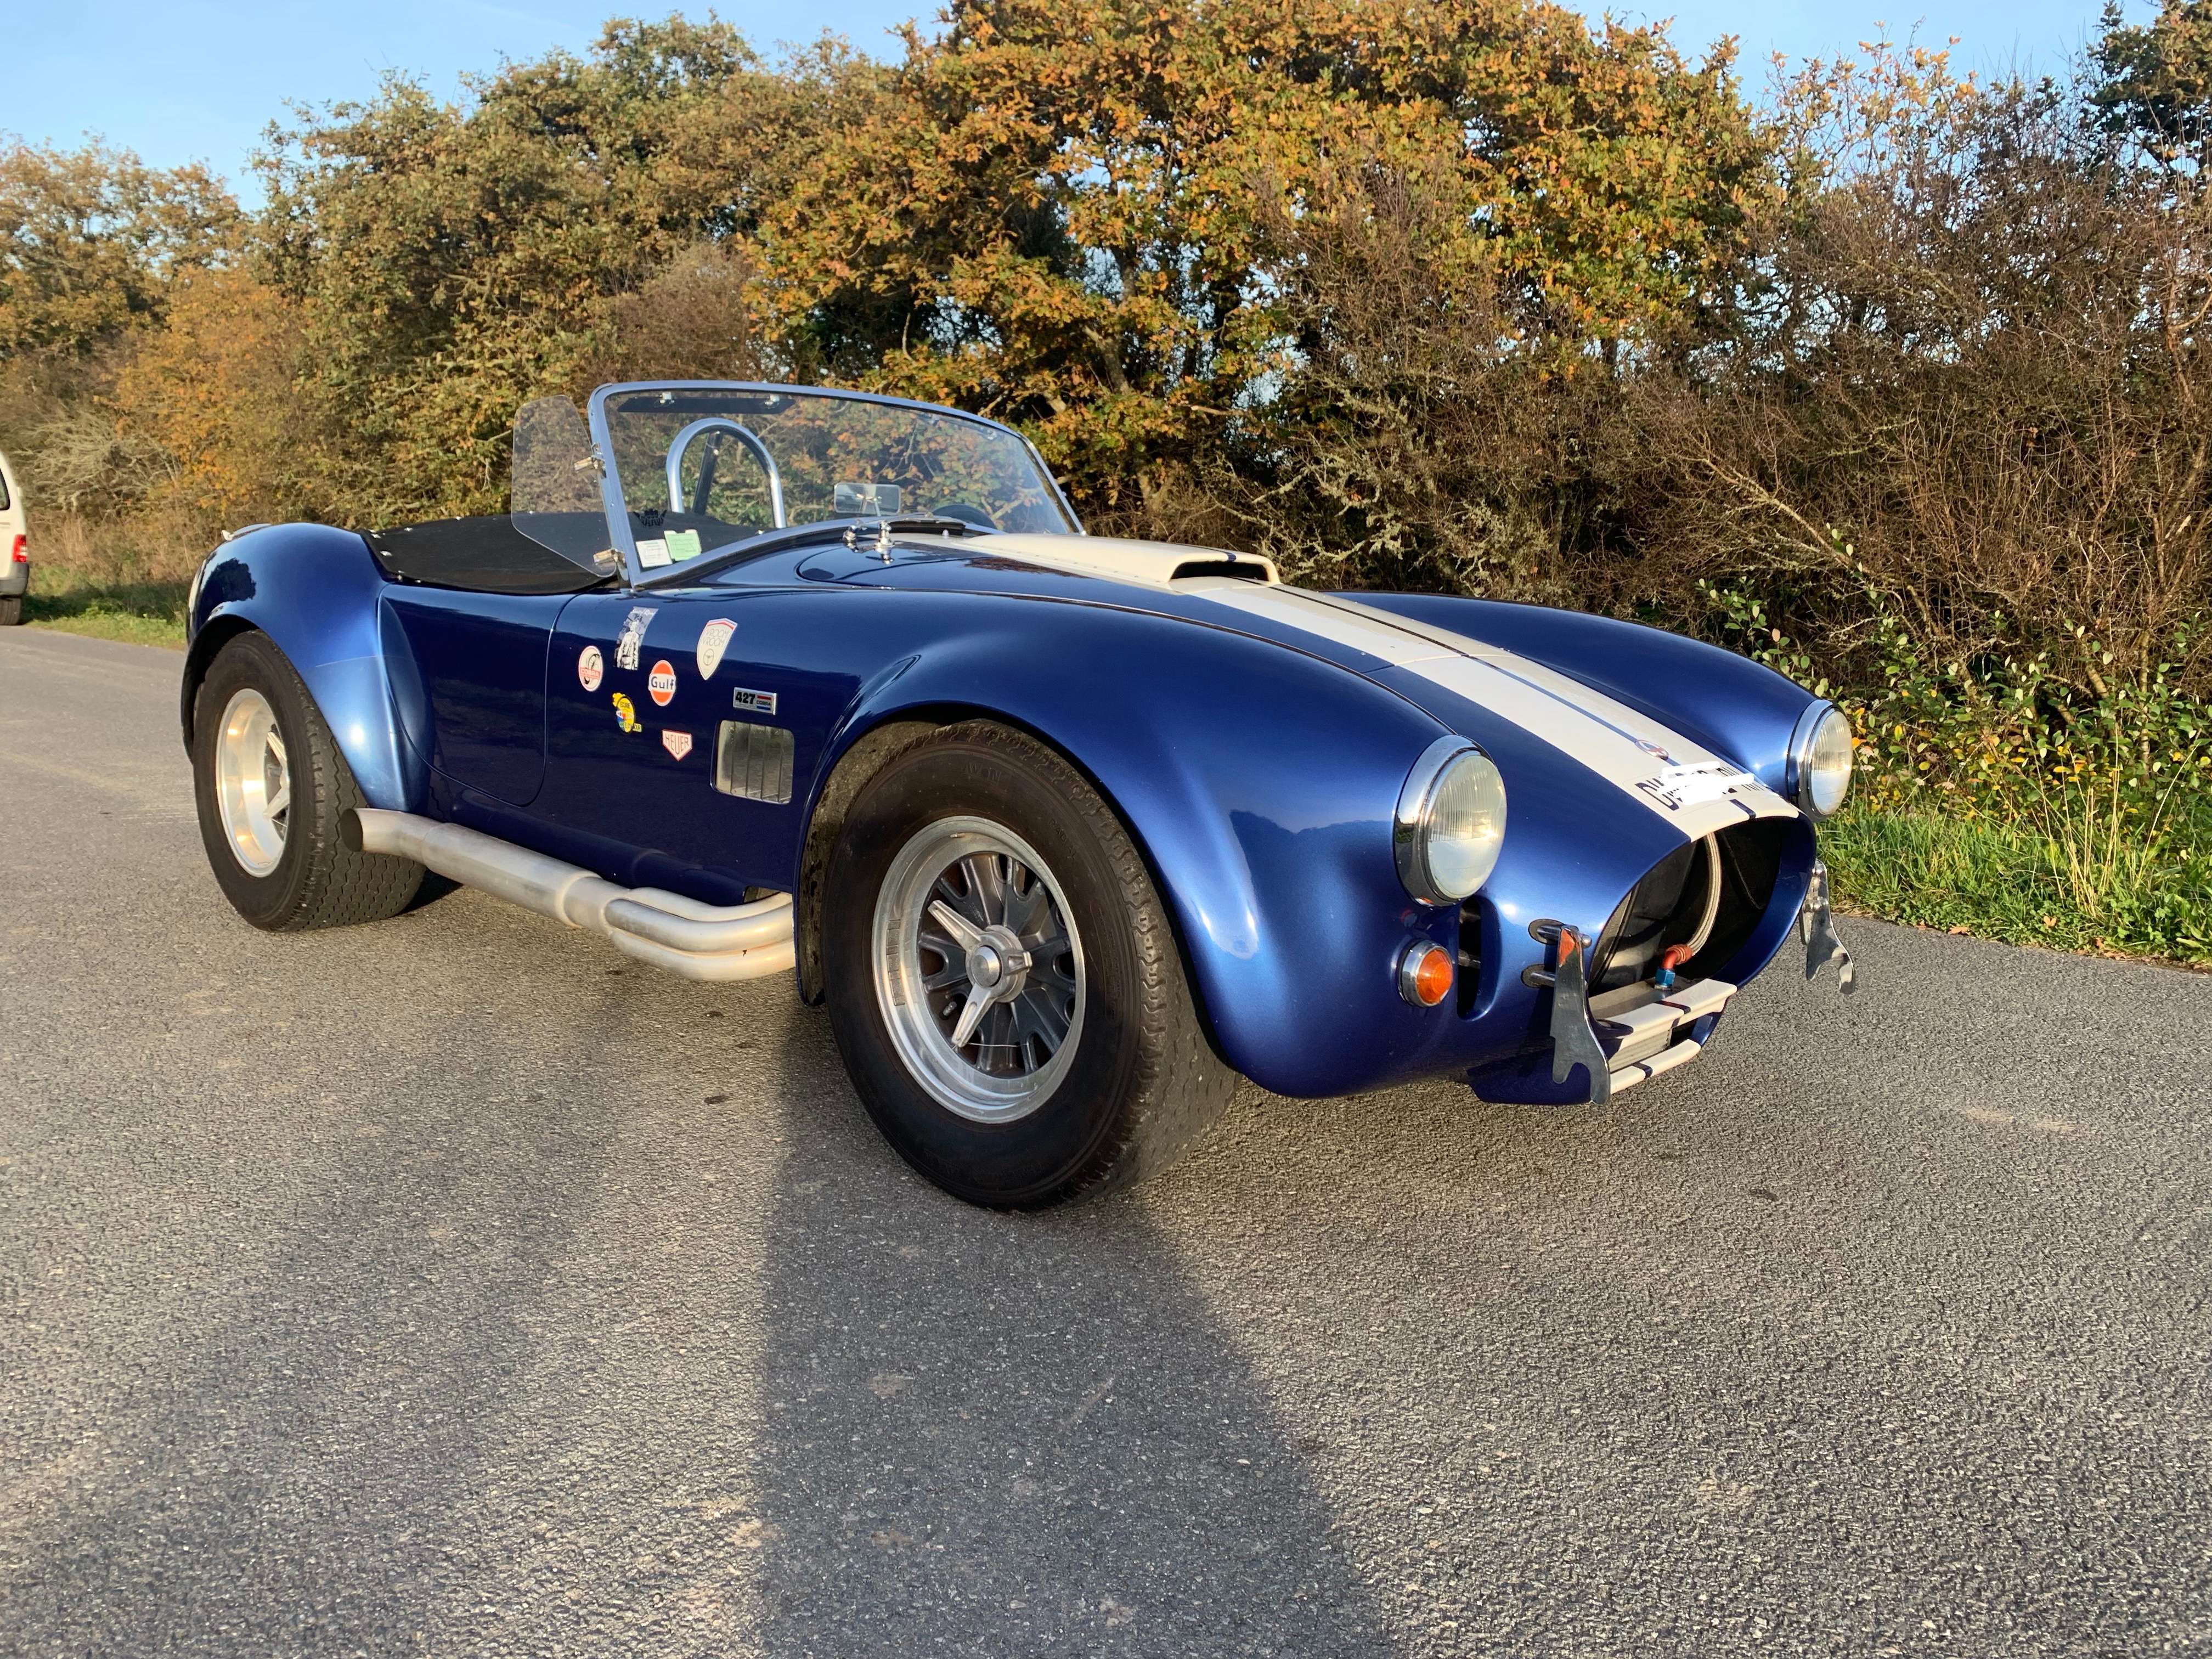 AC Cobra Convertible in Blue used in Guerande for € 159,000.-